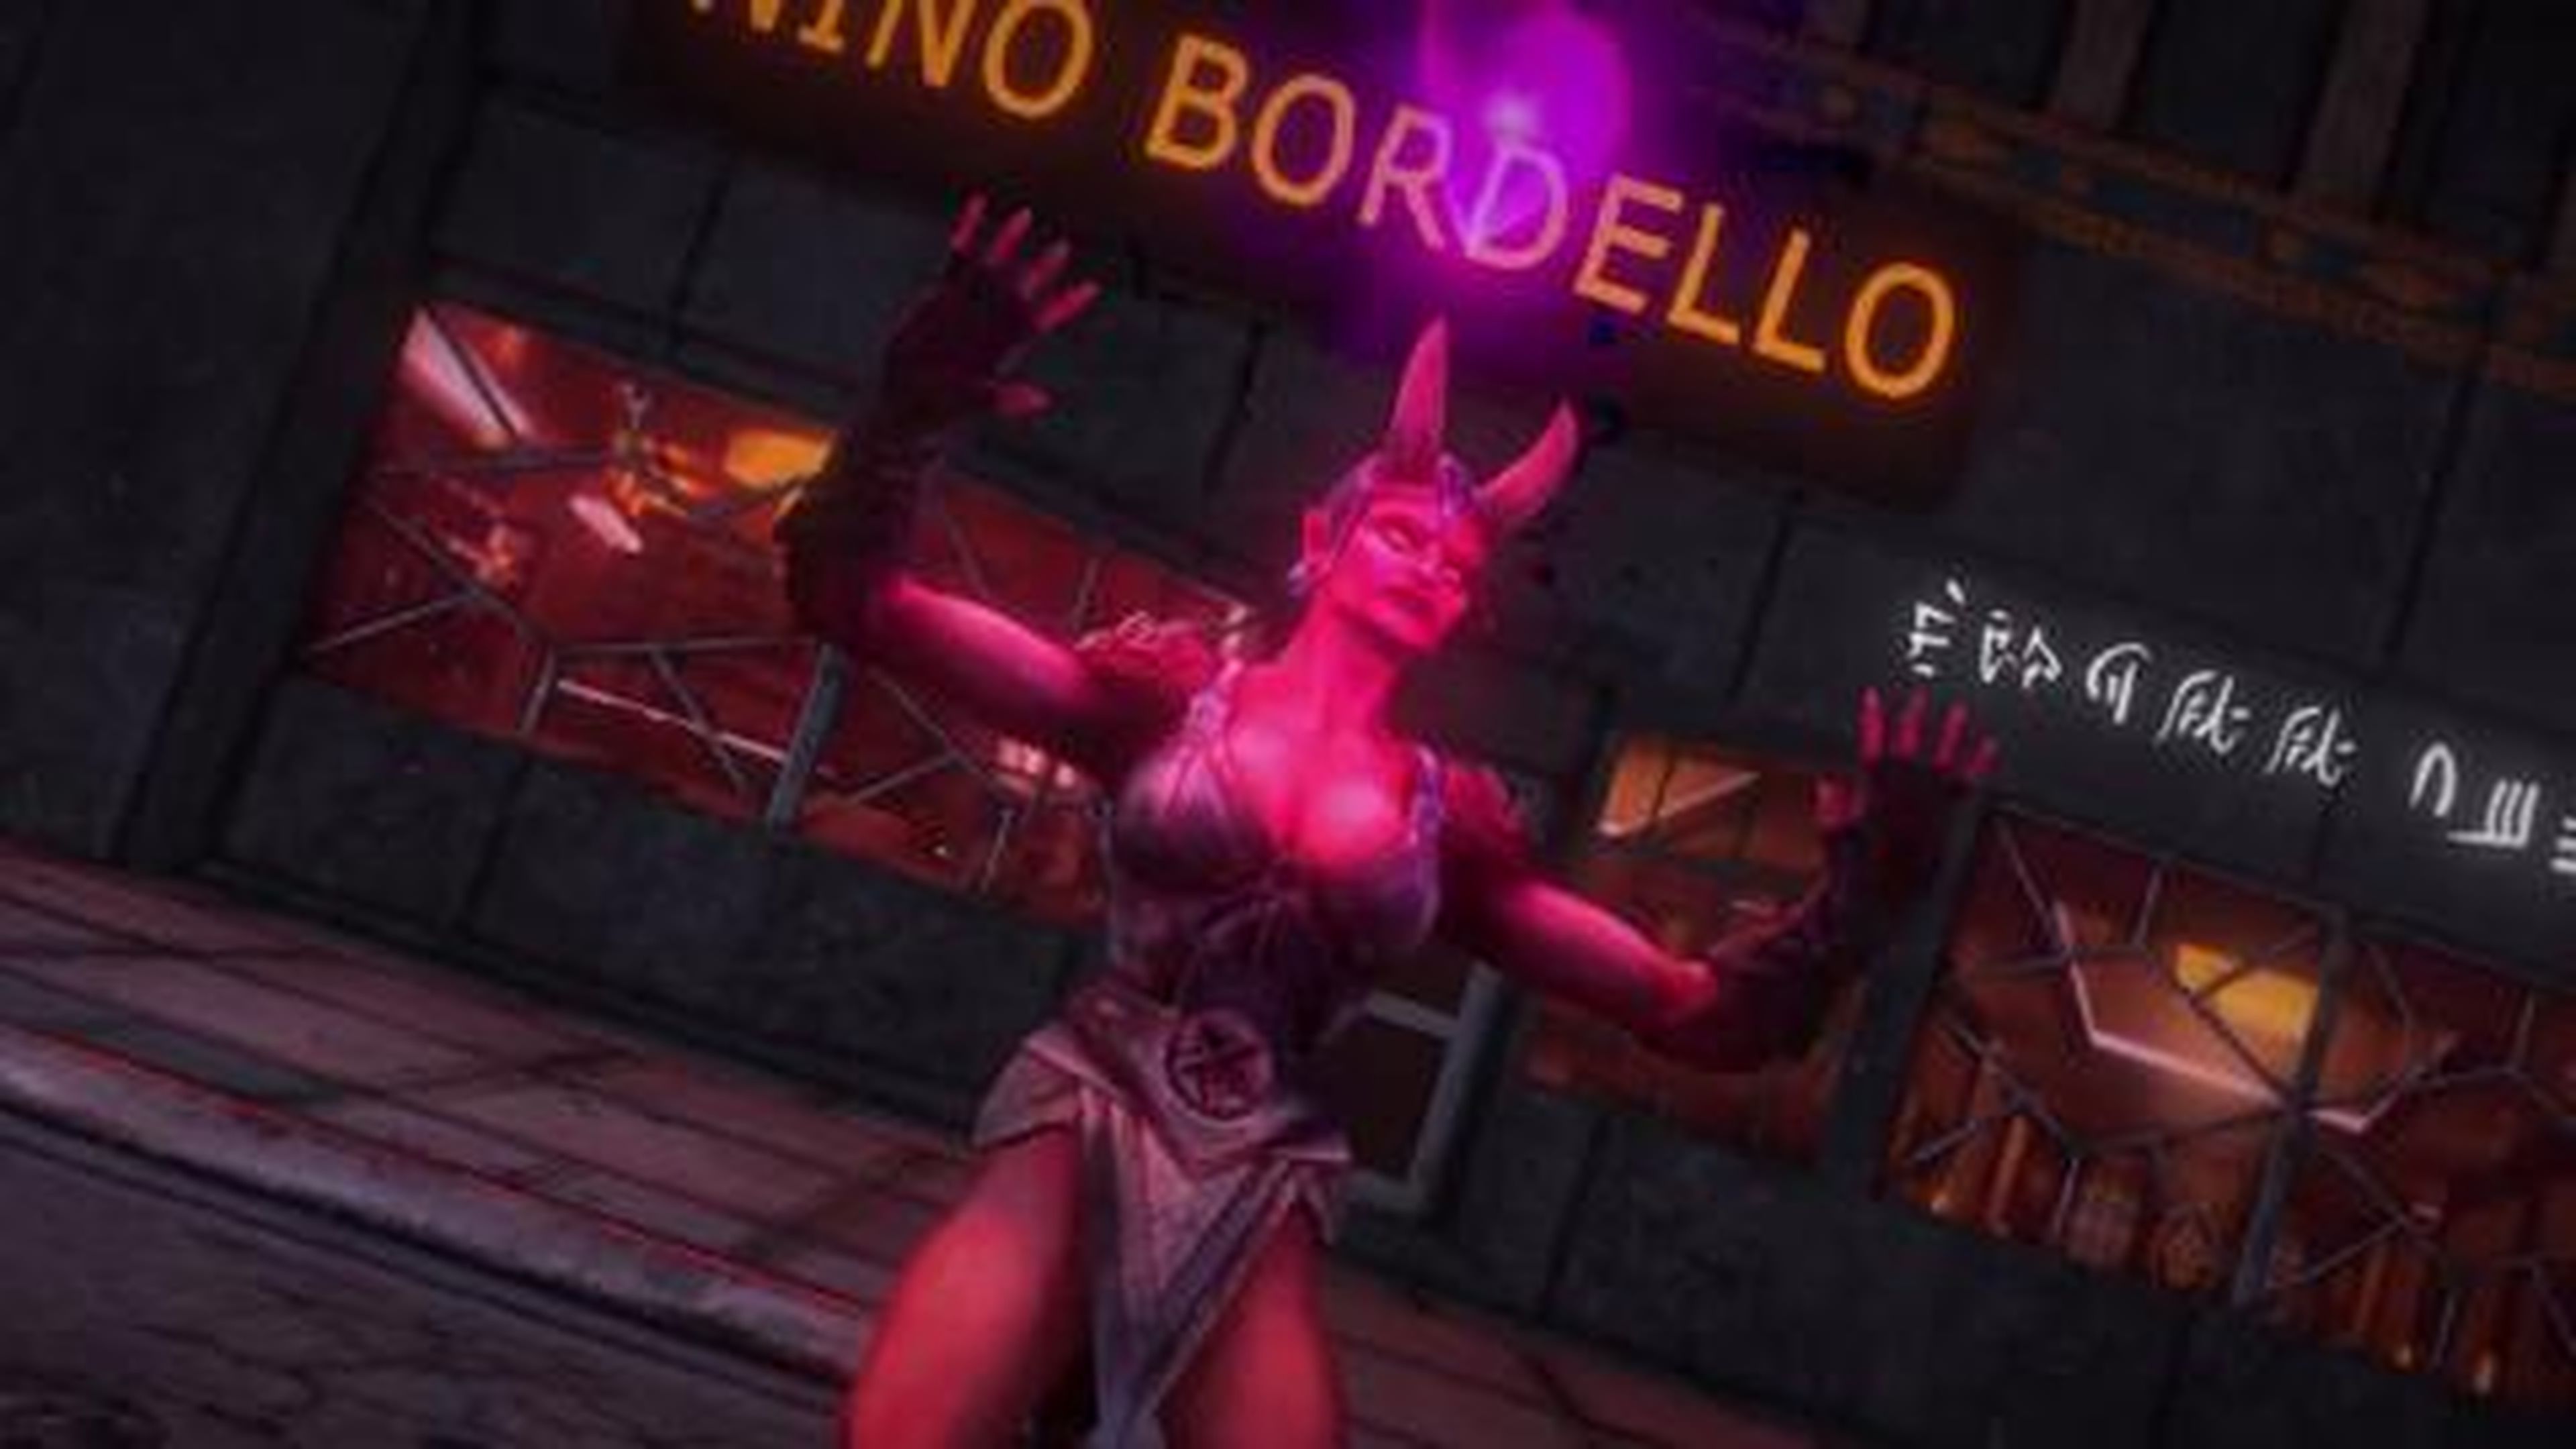 Saints Row 4 Gat Out of Hell - Weapons Trailer (PS4-Xbox One)